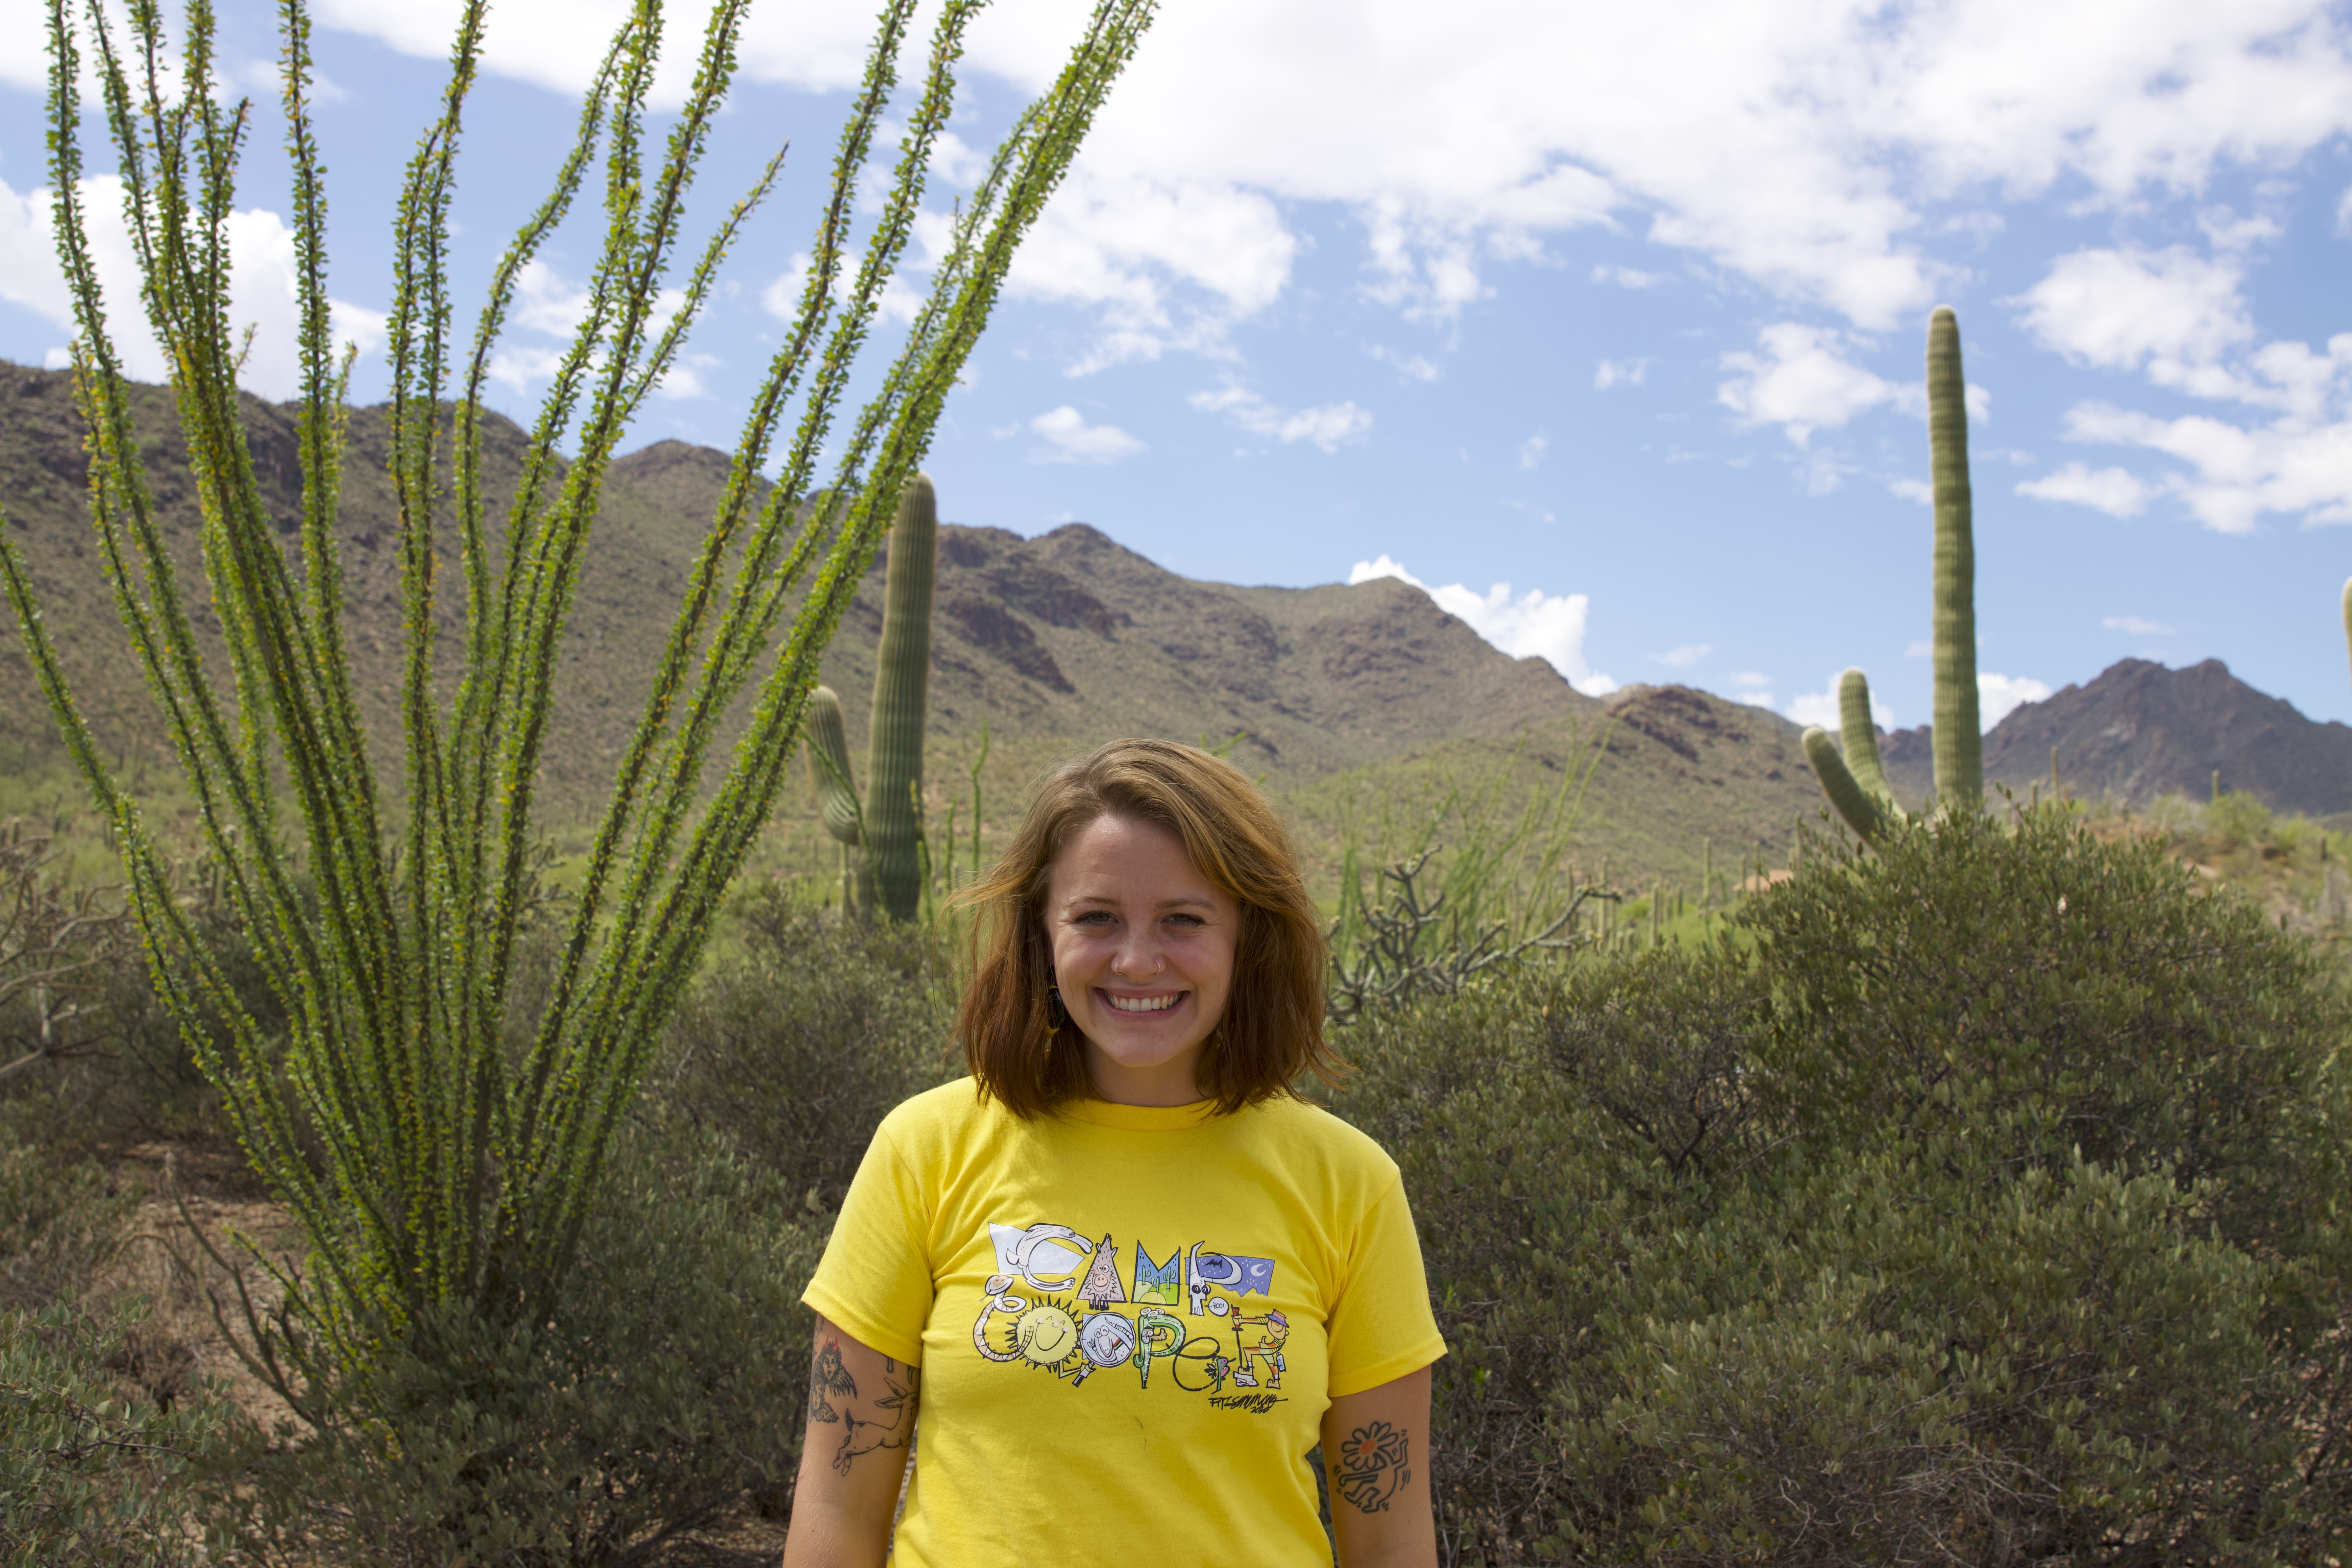 Aliya McDonald wearing a yellow shirt outside under a sunny sky with desert scenery in the background